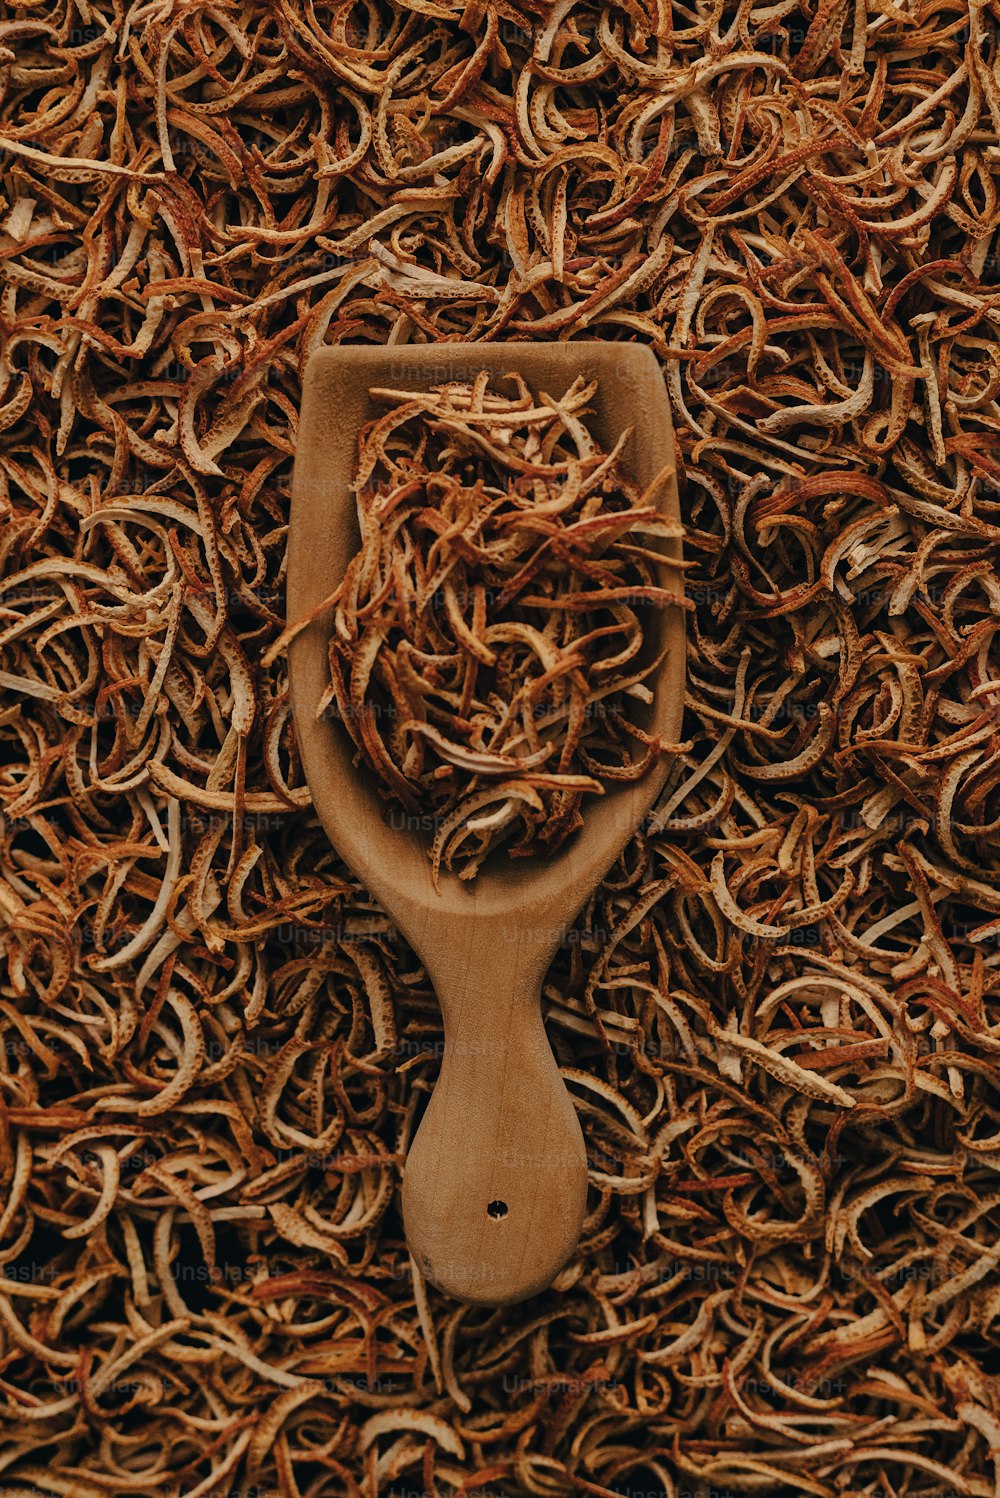 a wooden spoon sitting on top of a pile of dried grass